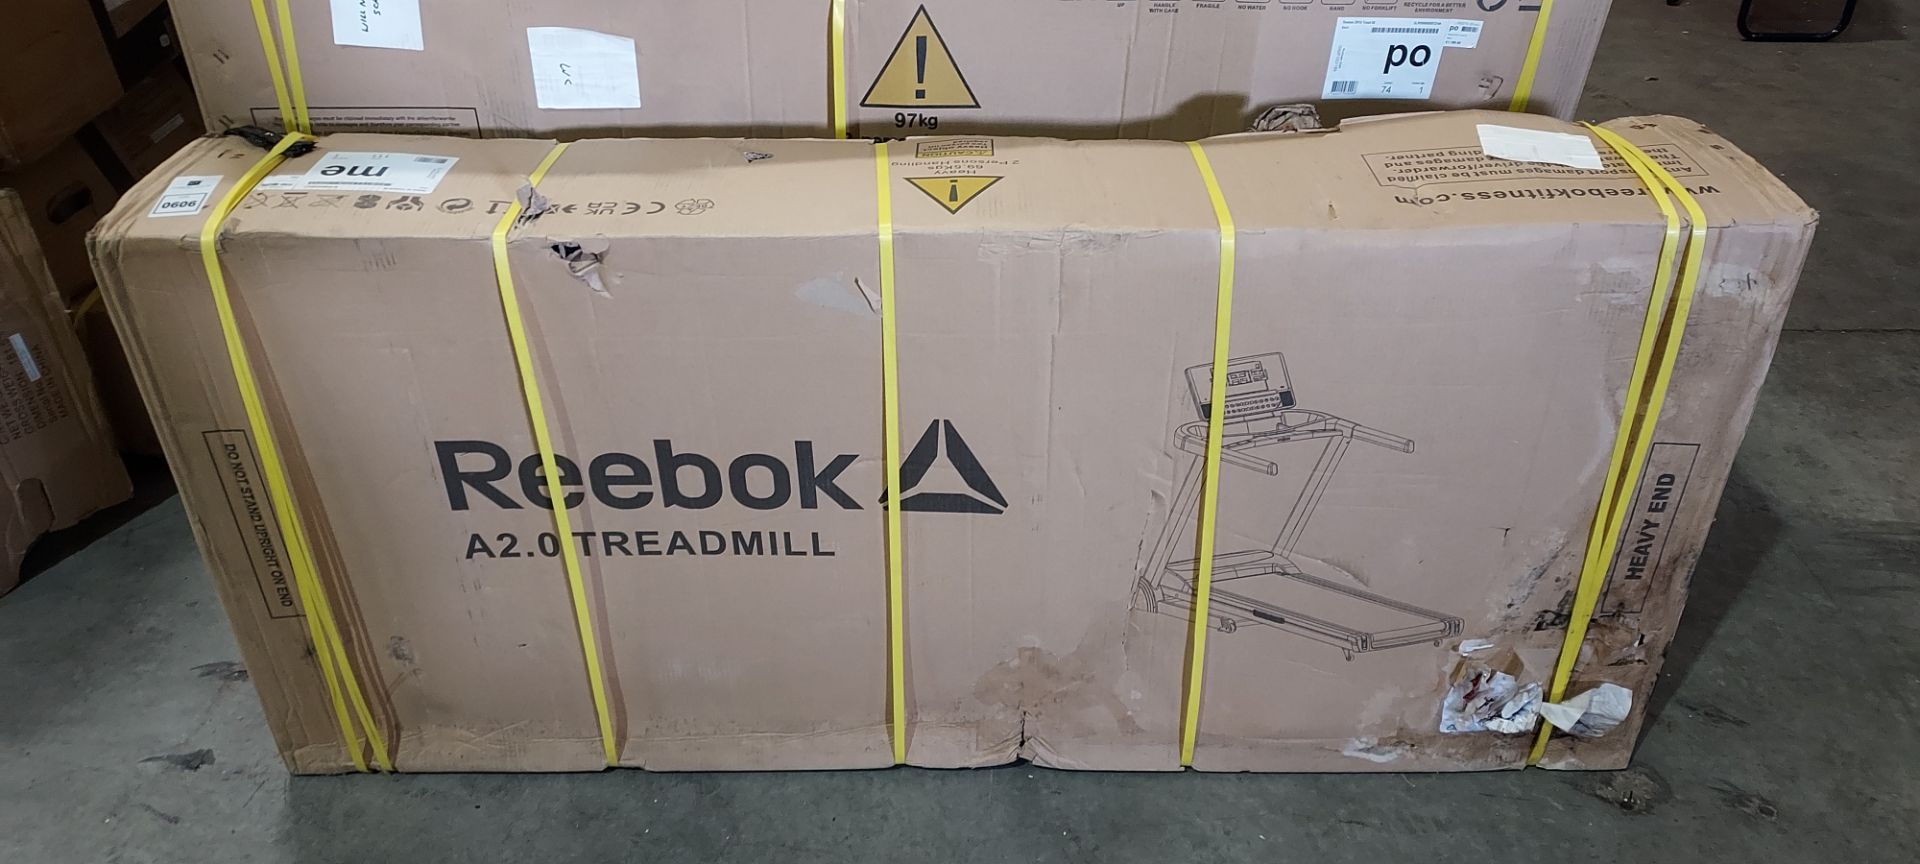 1 X BRAND NEW FACTORY SEALED REEBOK A2 TREADMILL 00 IN SILVER GROSS WEIGHT 75KG (NOTE BOX SLIGHTLY - Image 2 of 2